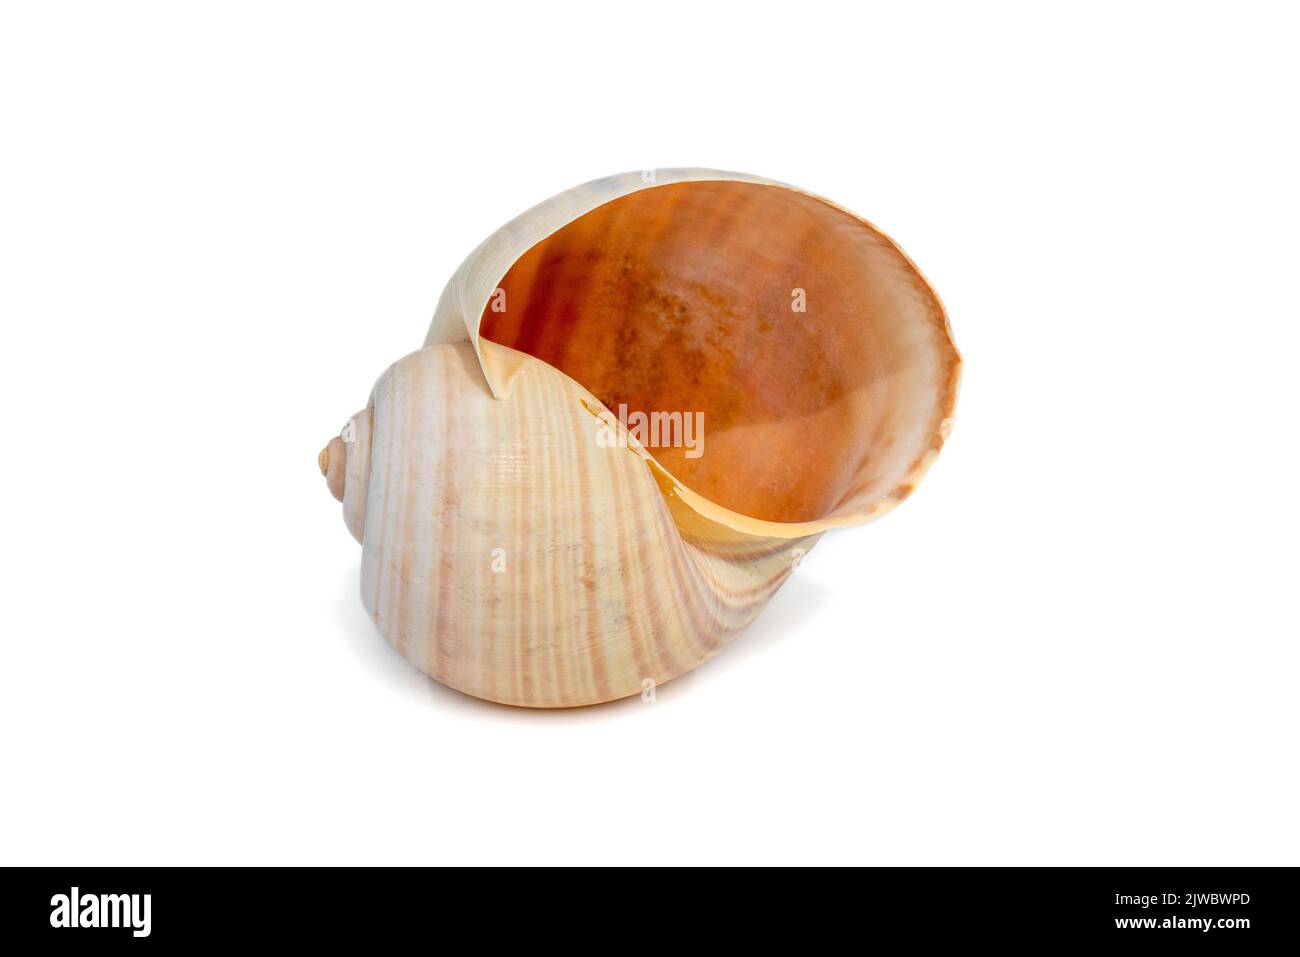 Image of large empty ocean snail shell on a white background. Undersea Animals. Sea shells. Stock Photo